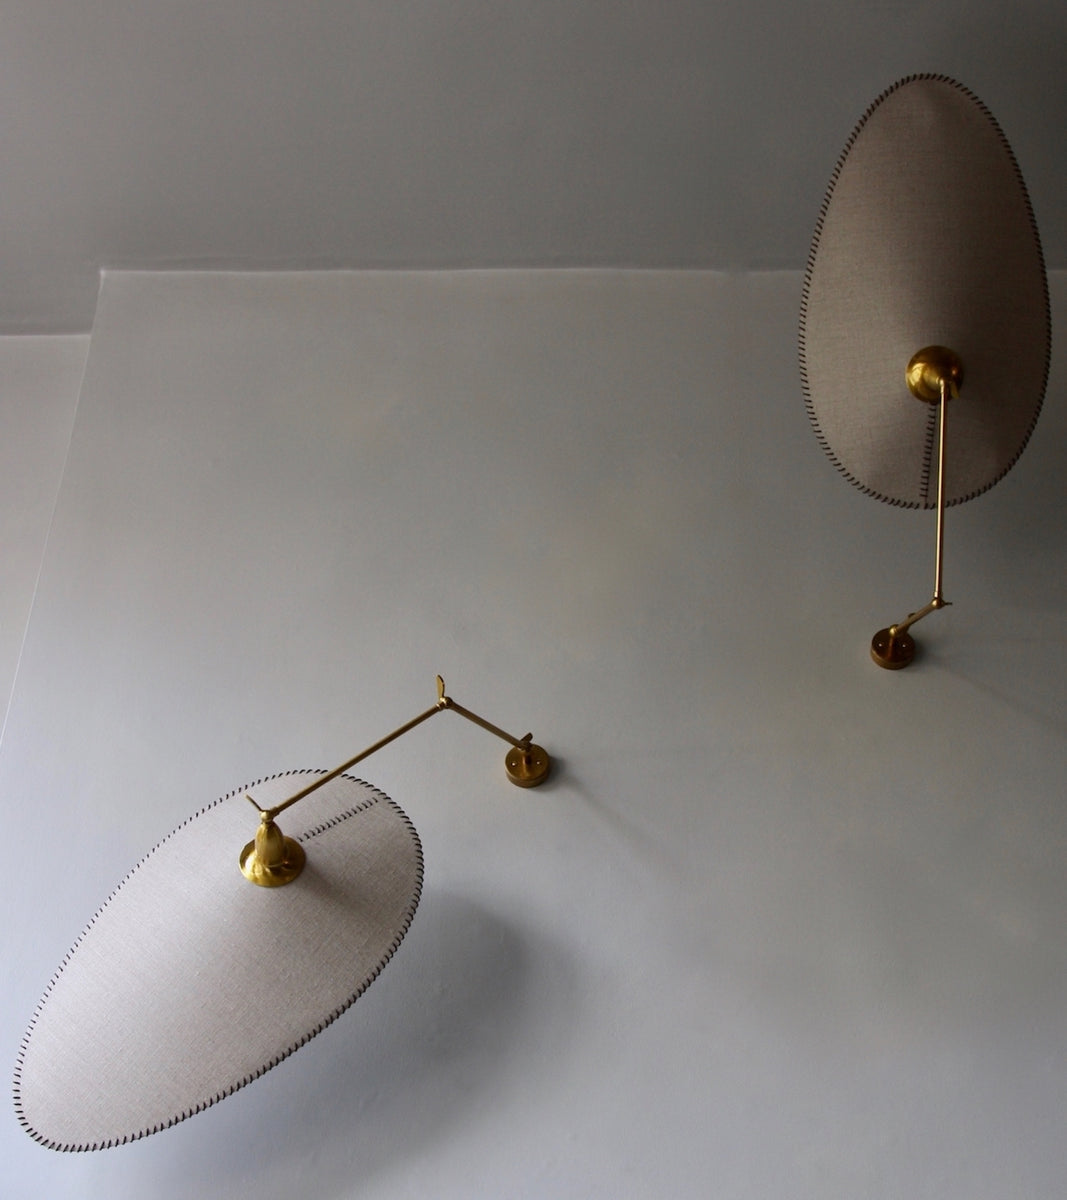 Pair of Articulated Wall Lights Italy, 1950s - Image 4